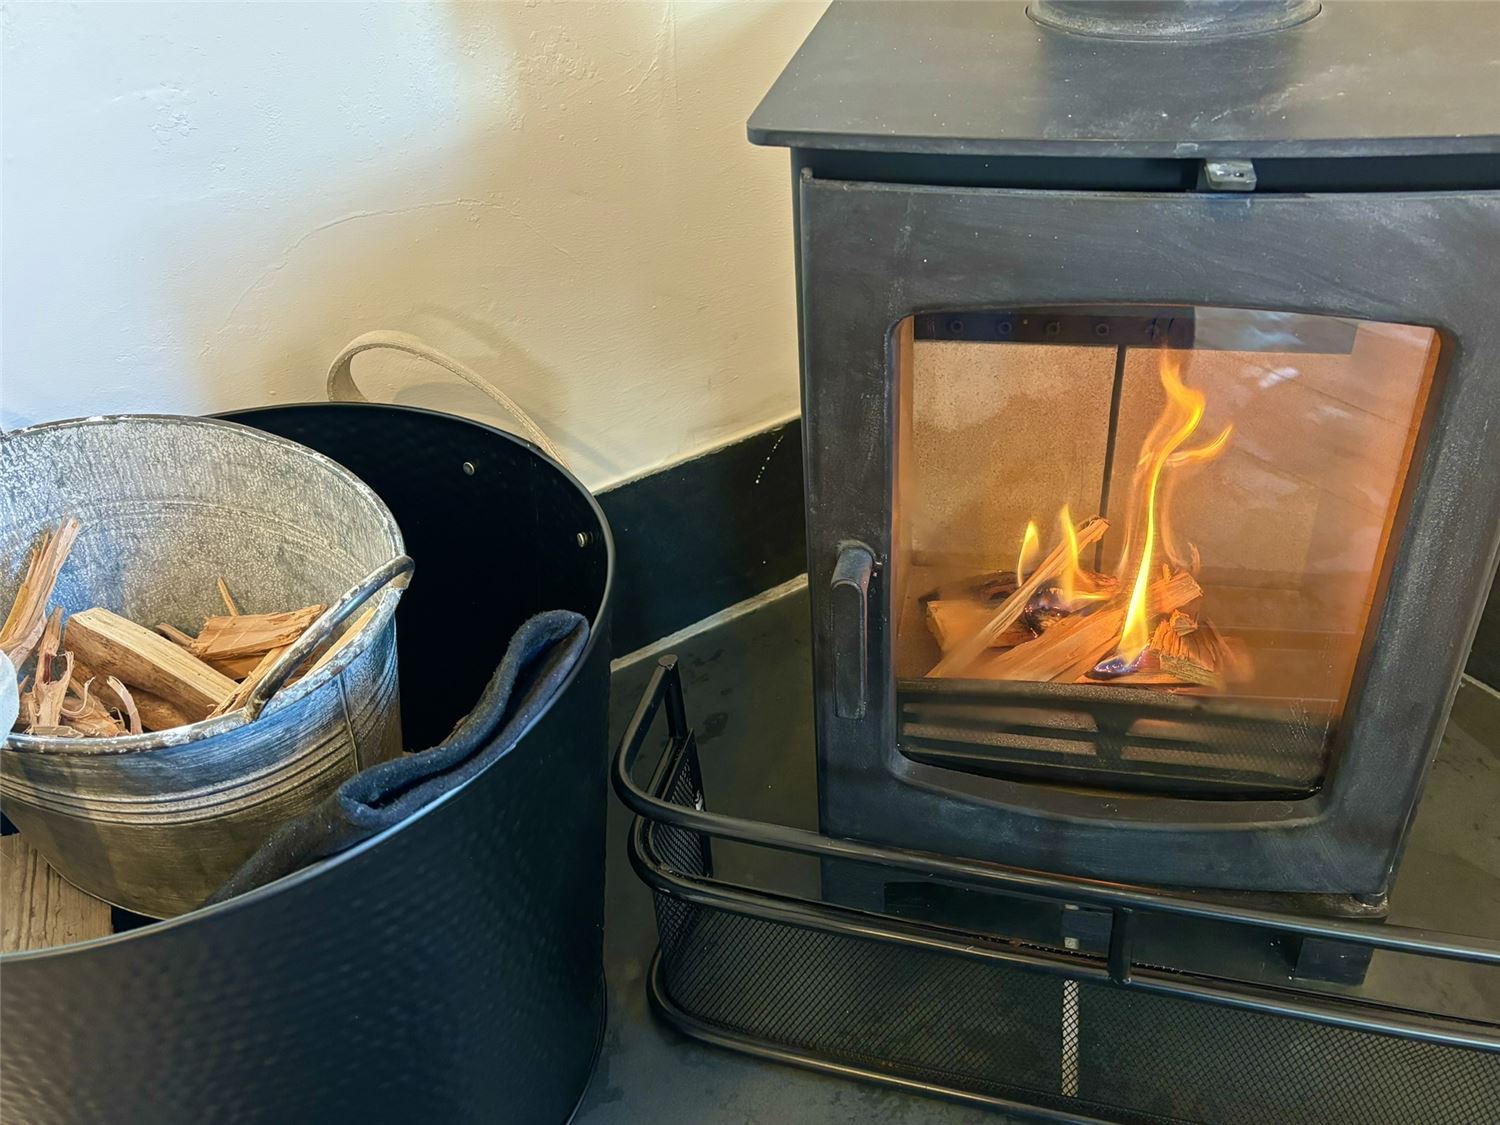 Sea view Seaberry and Blueberry Cottage both have a lovely log burner. Polrunny Farm holiday cottages Boscastle Cornwall